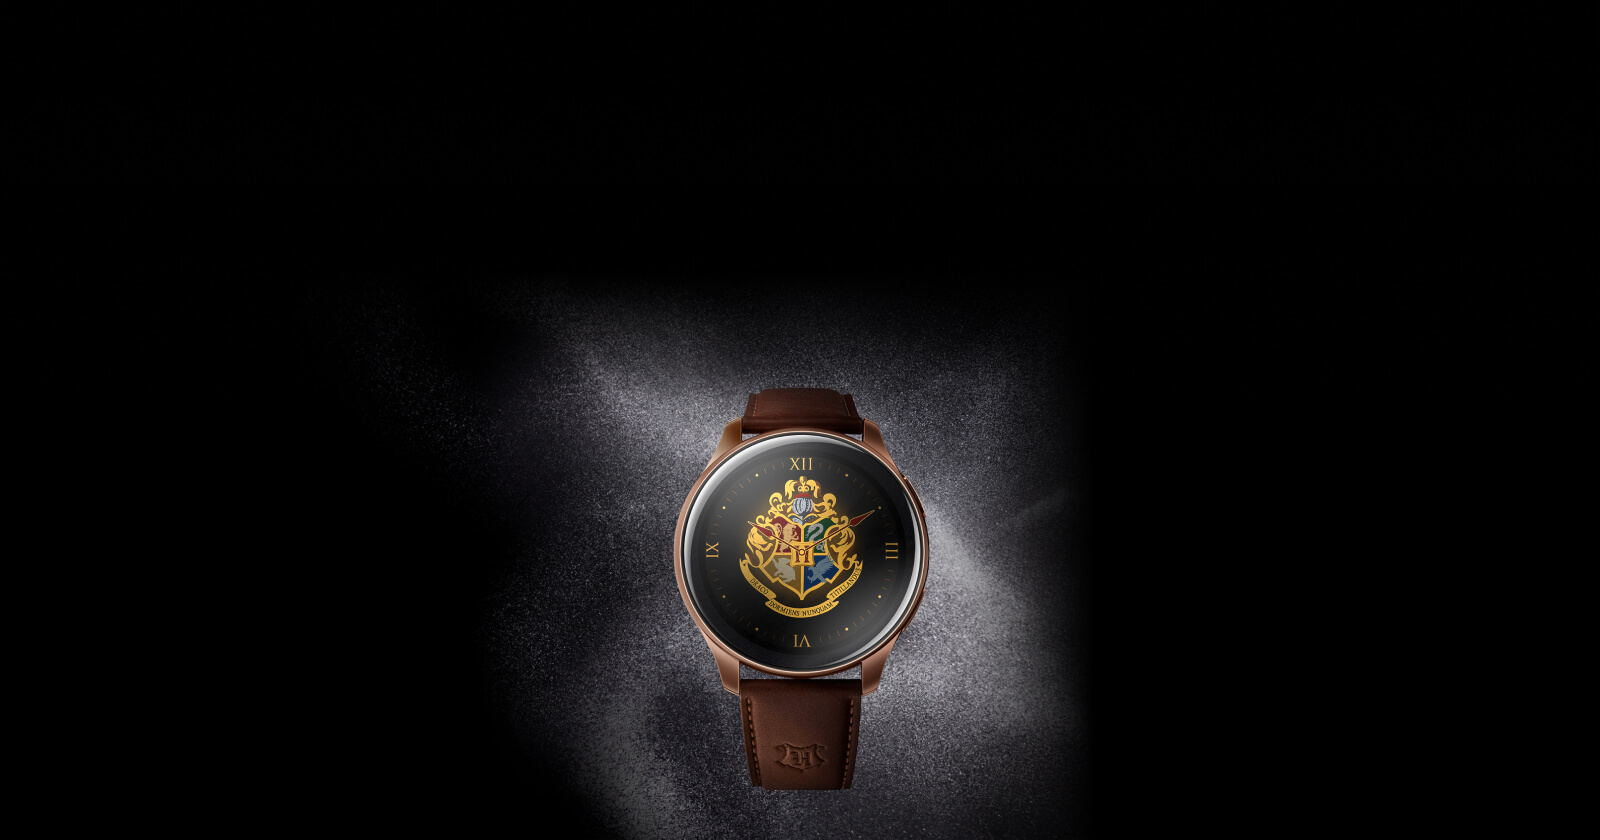 Is the HP Luxury SmartWatch the Best in India Yet?